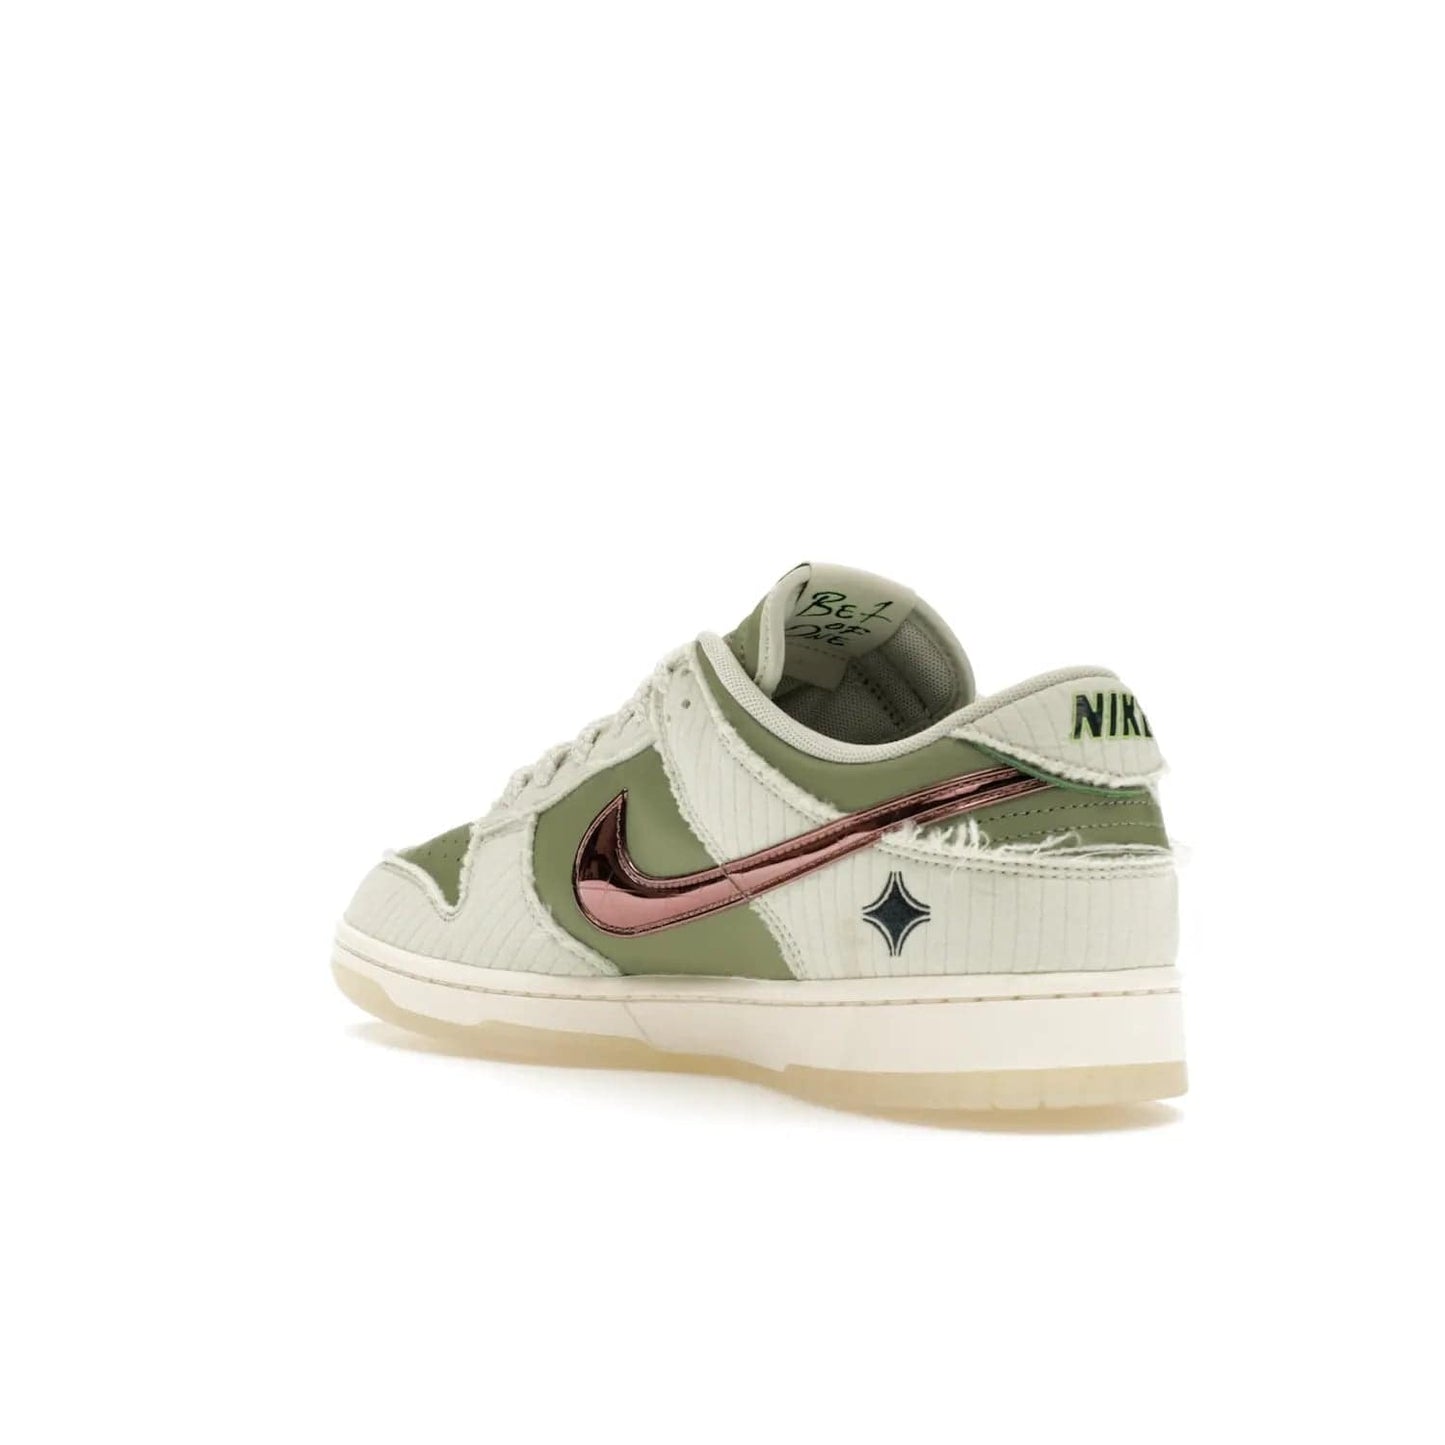 Nike Dunk Low Retro PRM Kyler Murray Be 1 of One - Image 24 - Only at www.BallersClubKickz.com - Introducing the Nike Dunk Low Retro PRM Kyler Murray "Be 1 of One"! A Sea Glass upper with Sail and Oil Green accents, finished with Rose Gold accents. Drop date: November 10th.